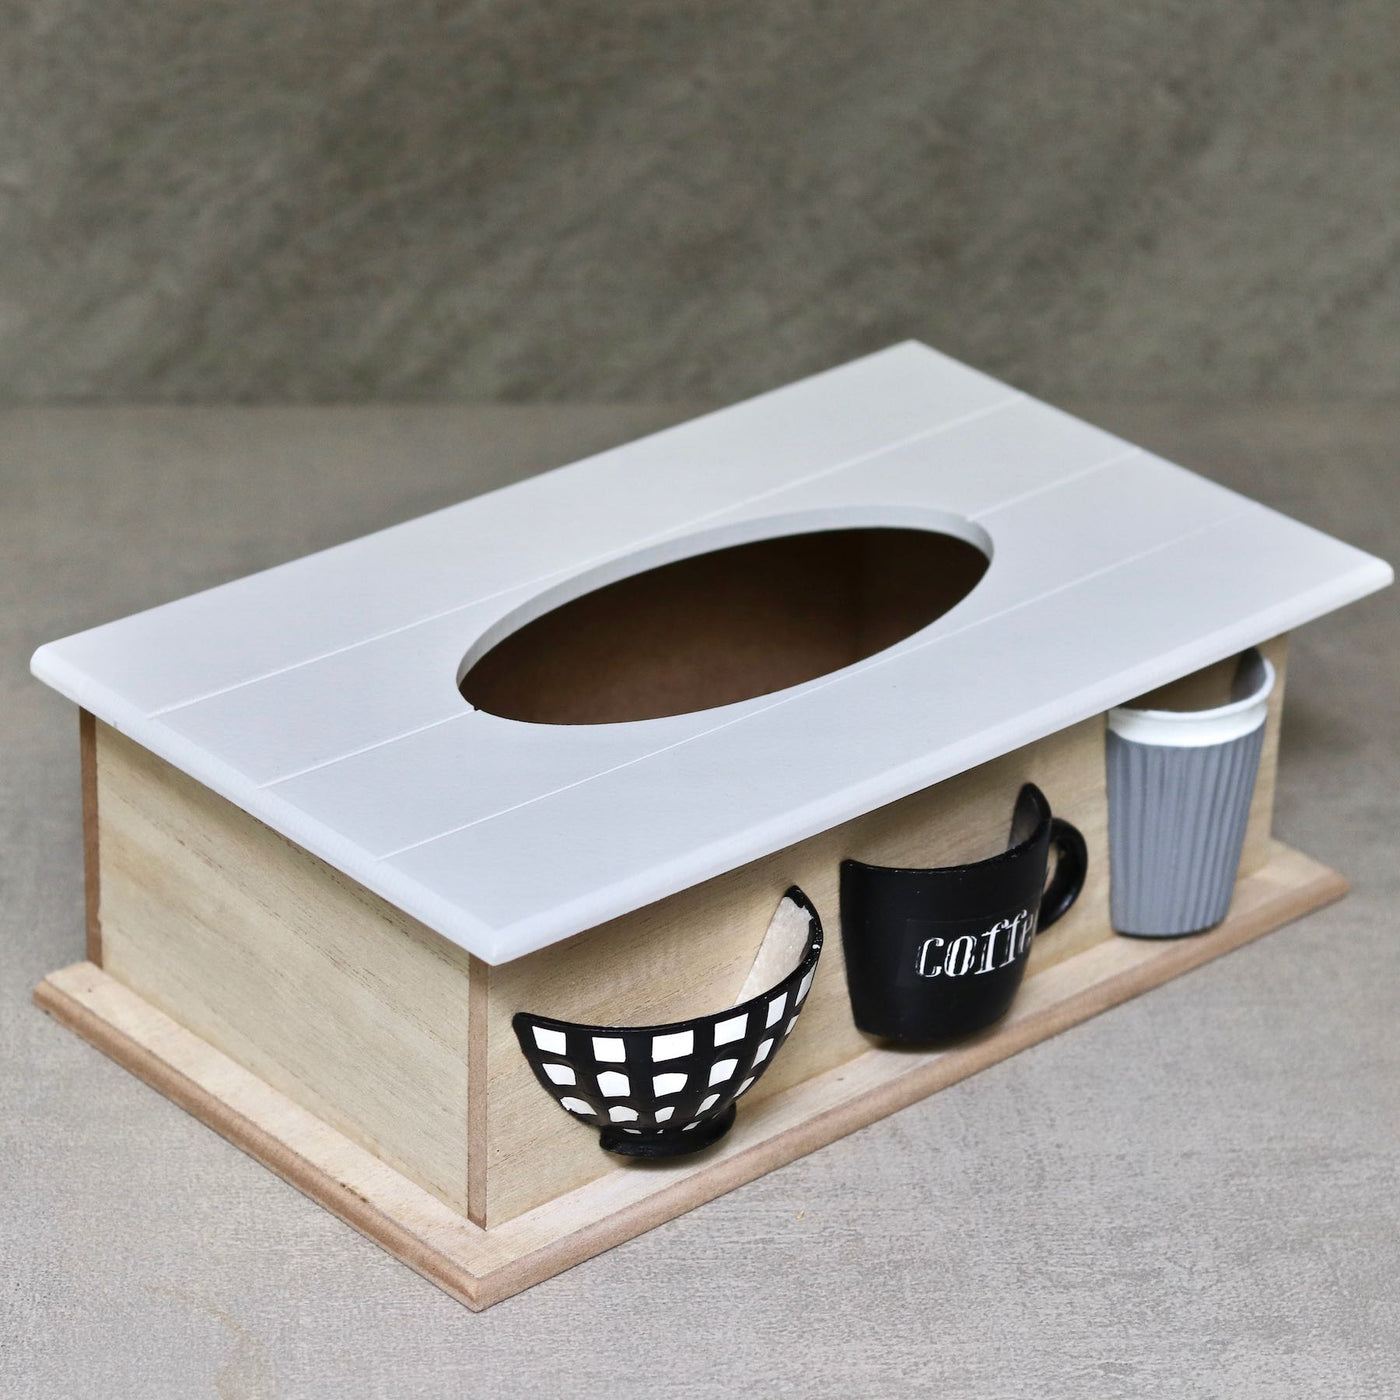 wooden tissue box with holders